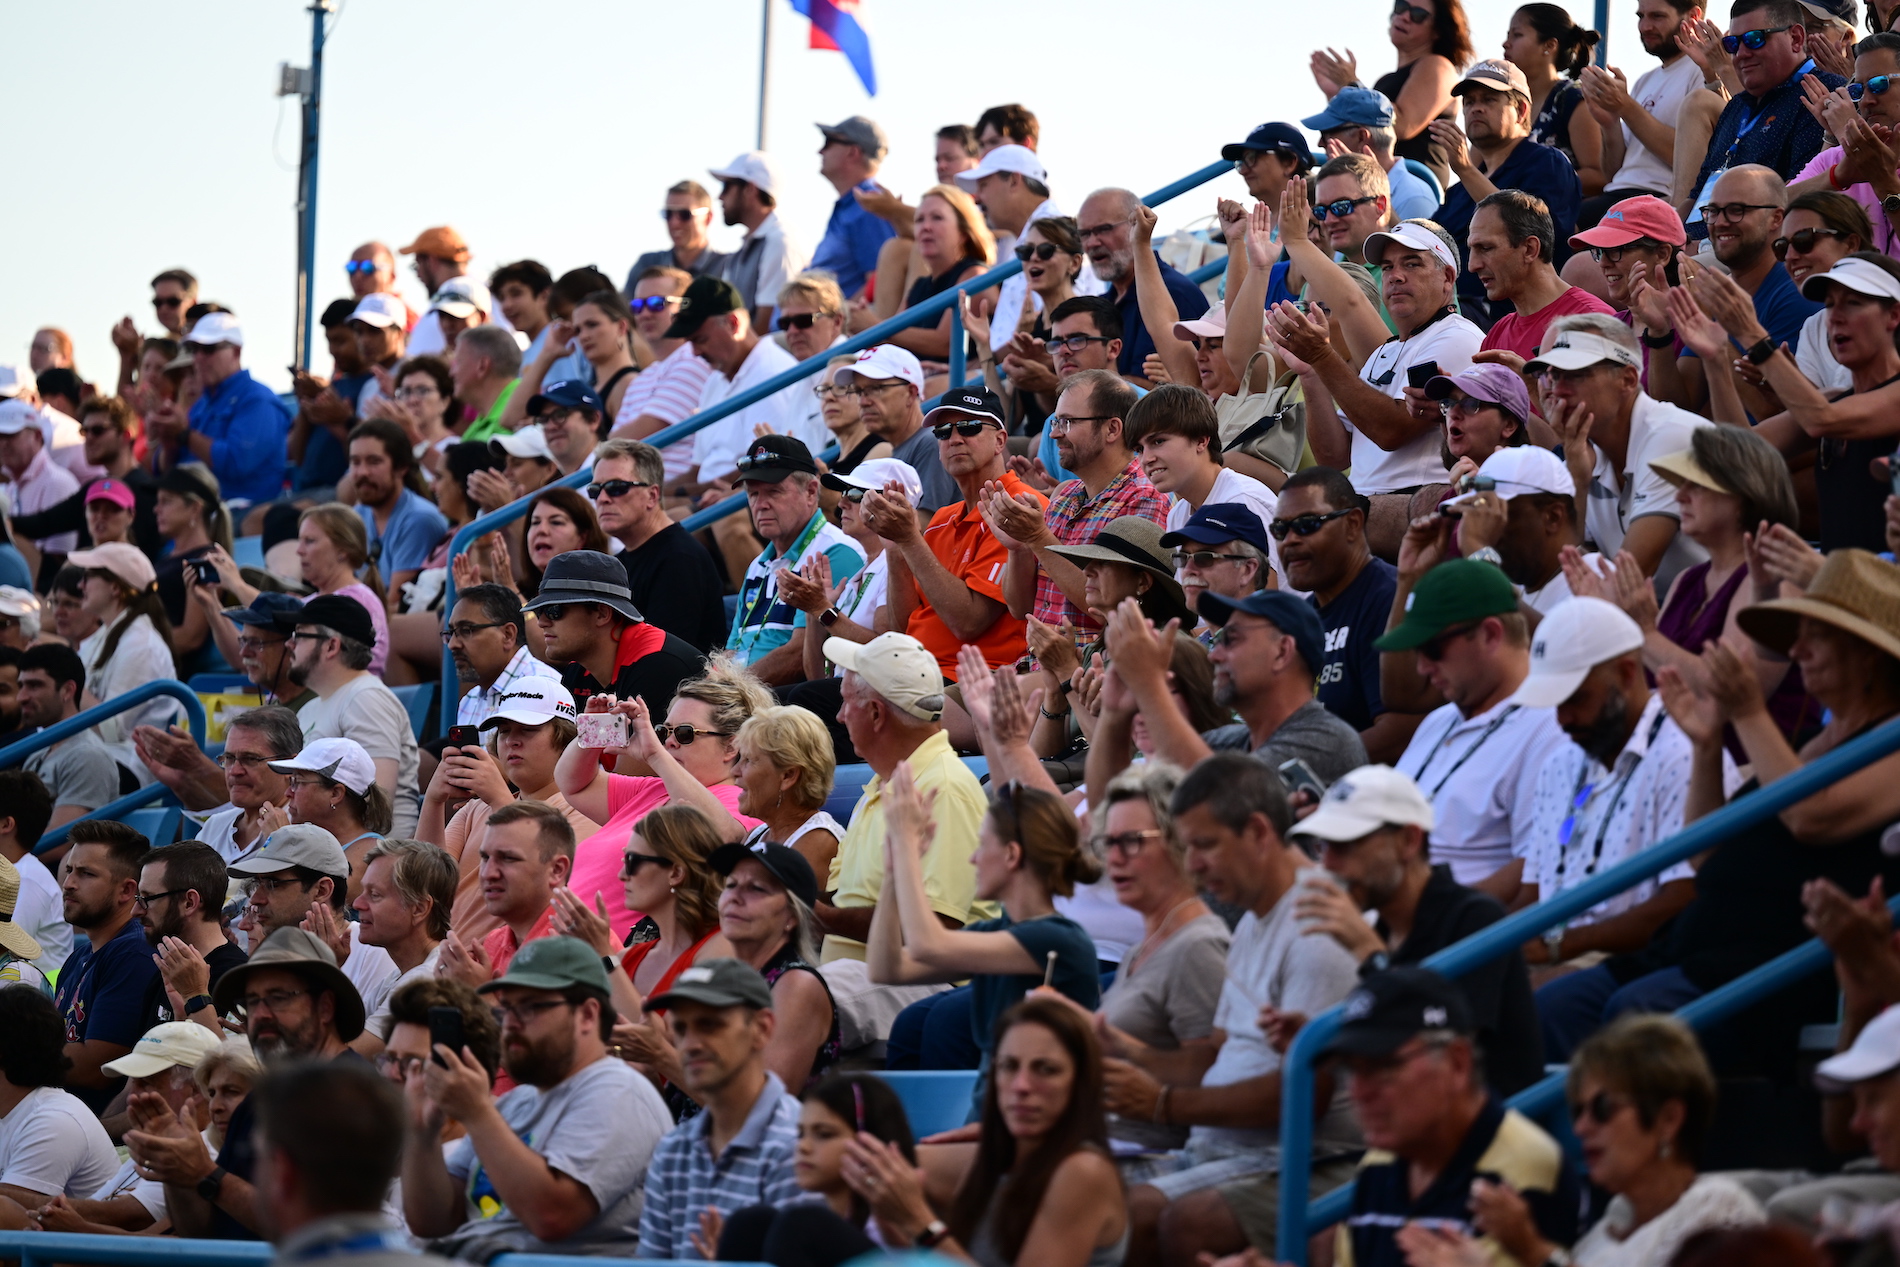 fans in the stands at tennis match